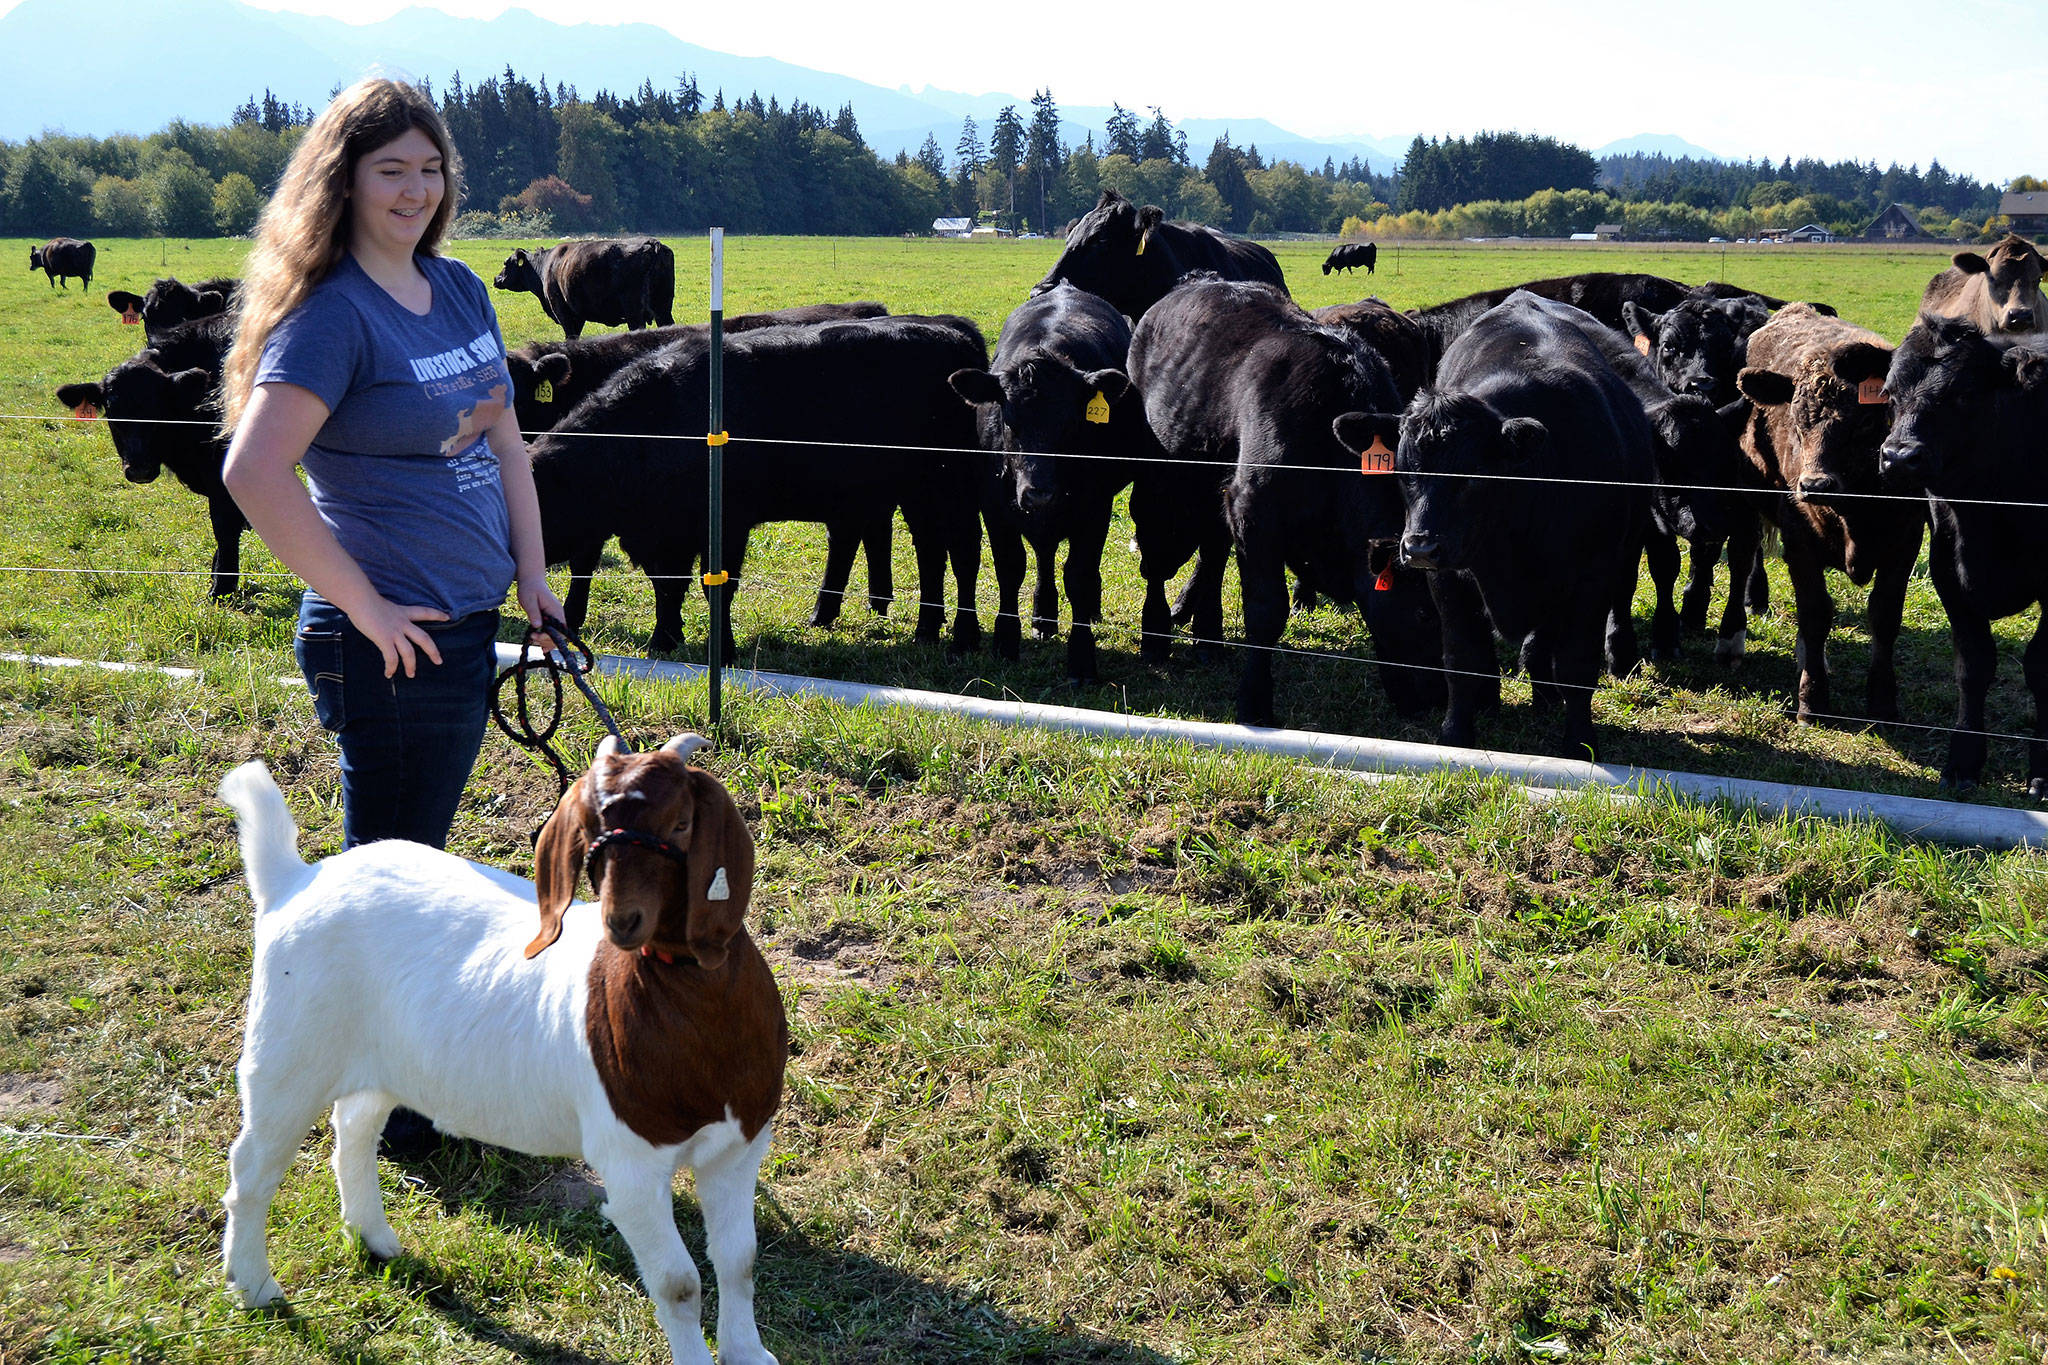 Jill Adolphsen, 13, of 4H Rascals, brings Willow the goat over to meet some cattle during the Clallam County Farm Tour at Finn Hall Farm.